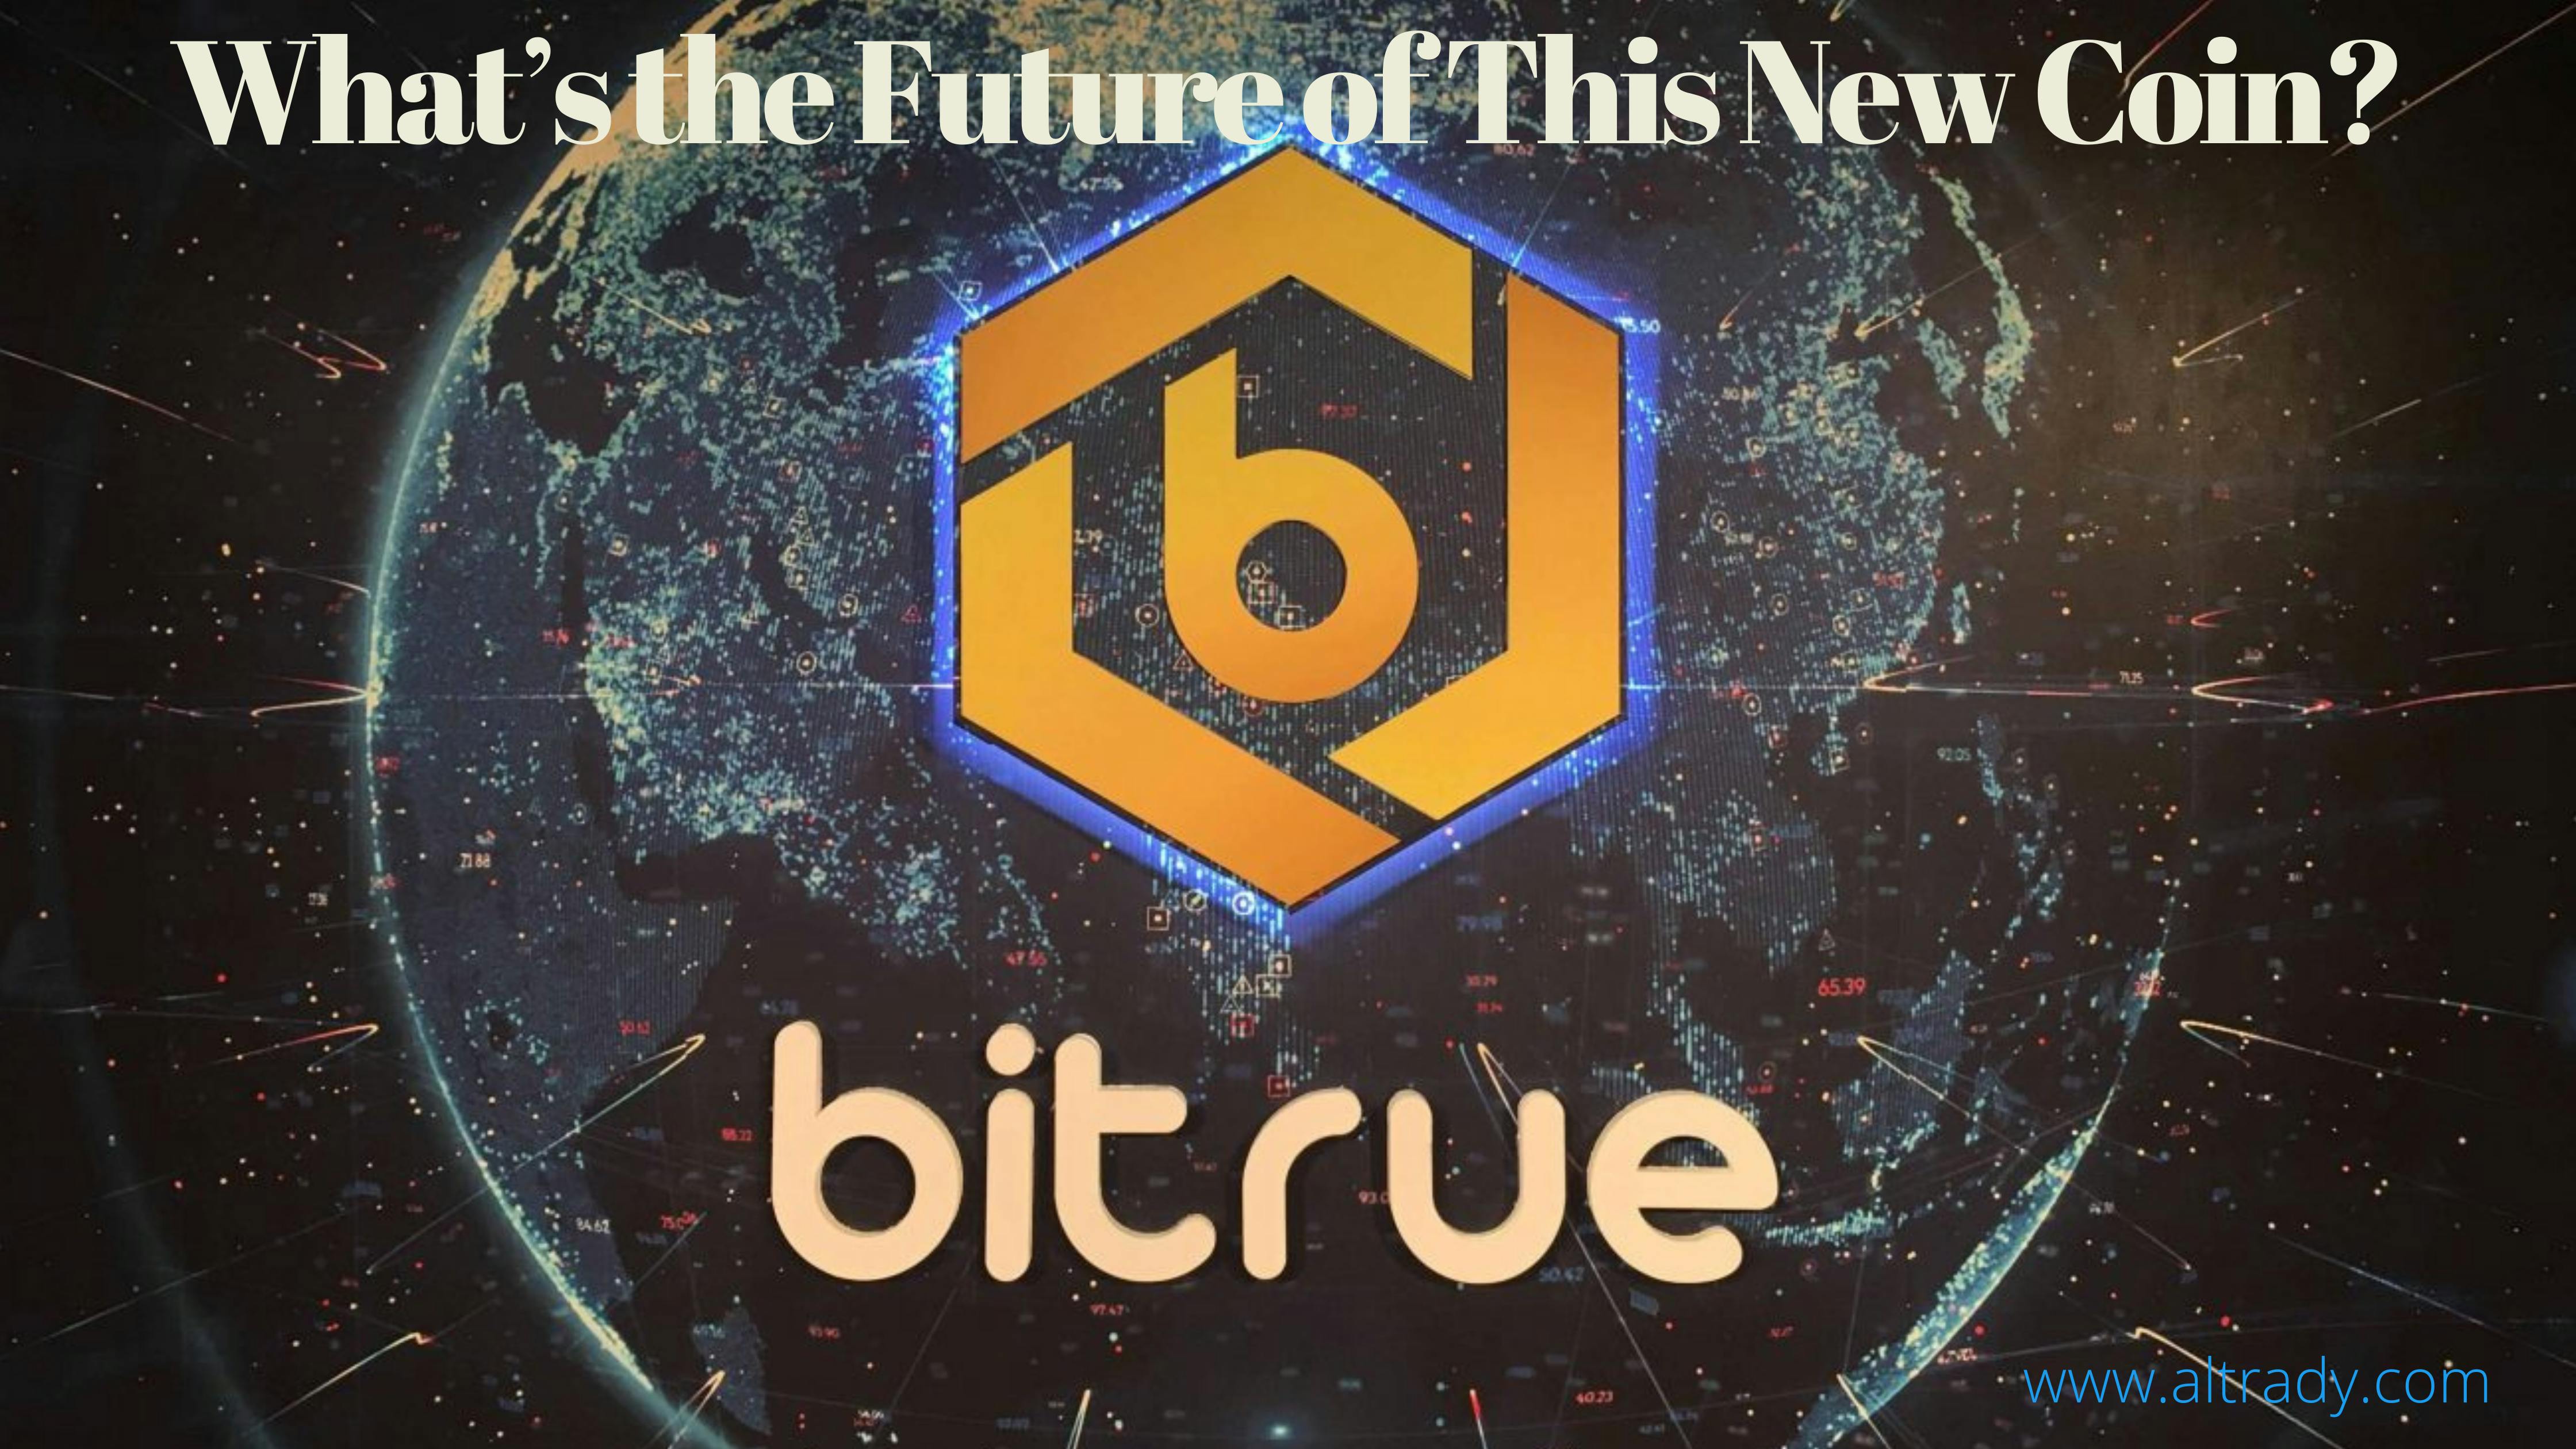 BTR Coin: What’s the Future of This New Coin?